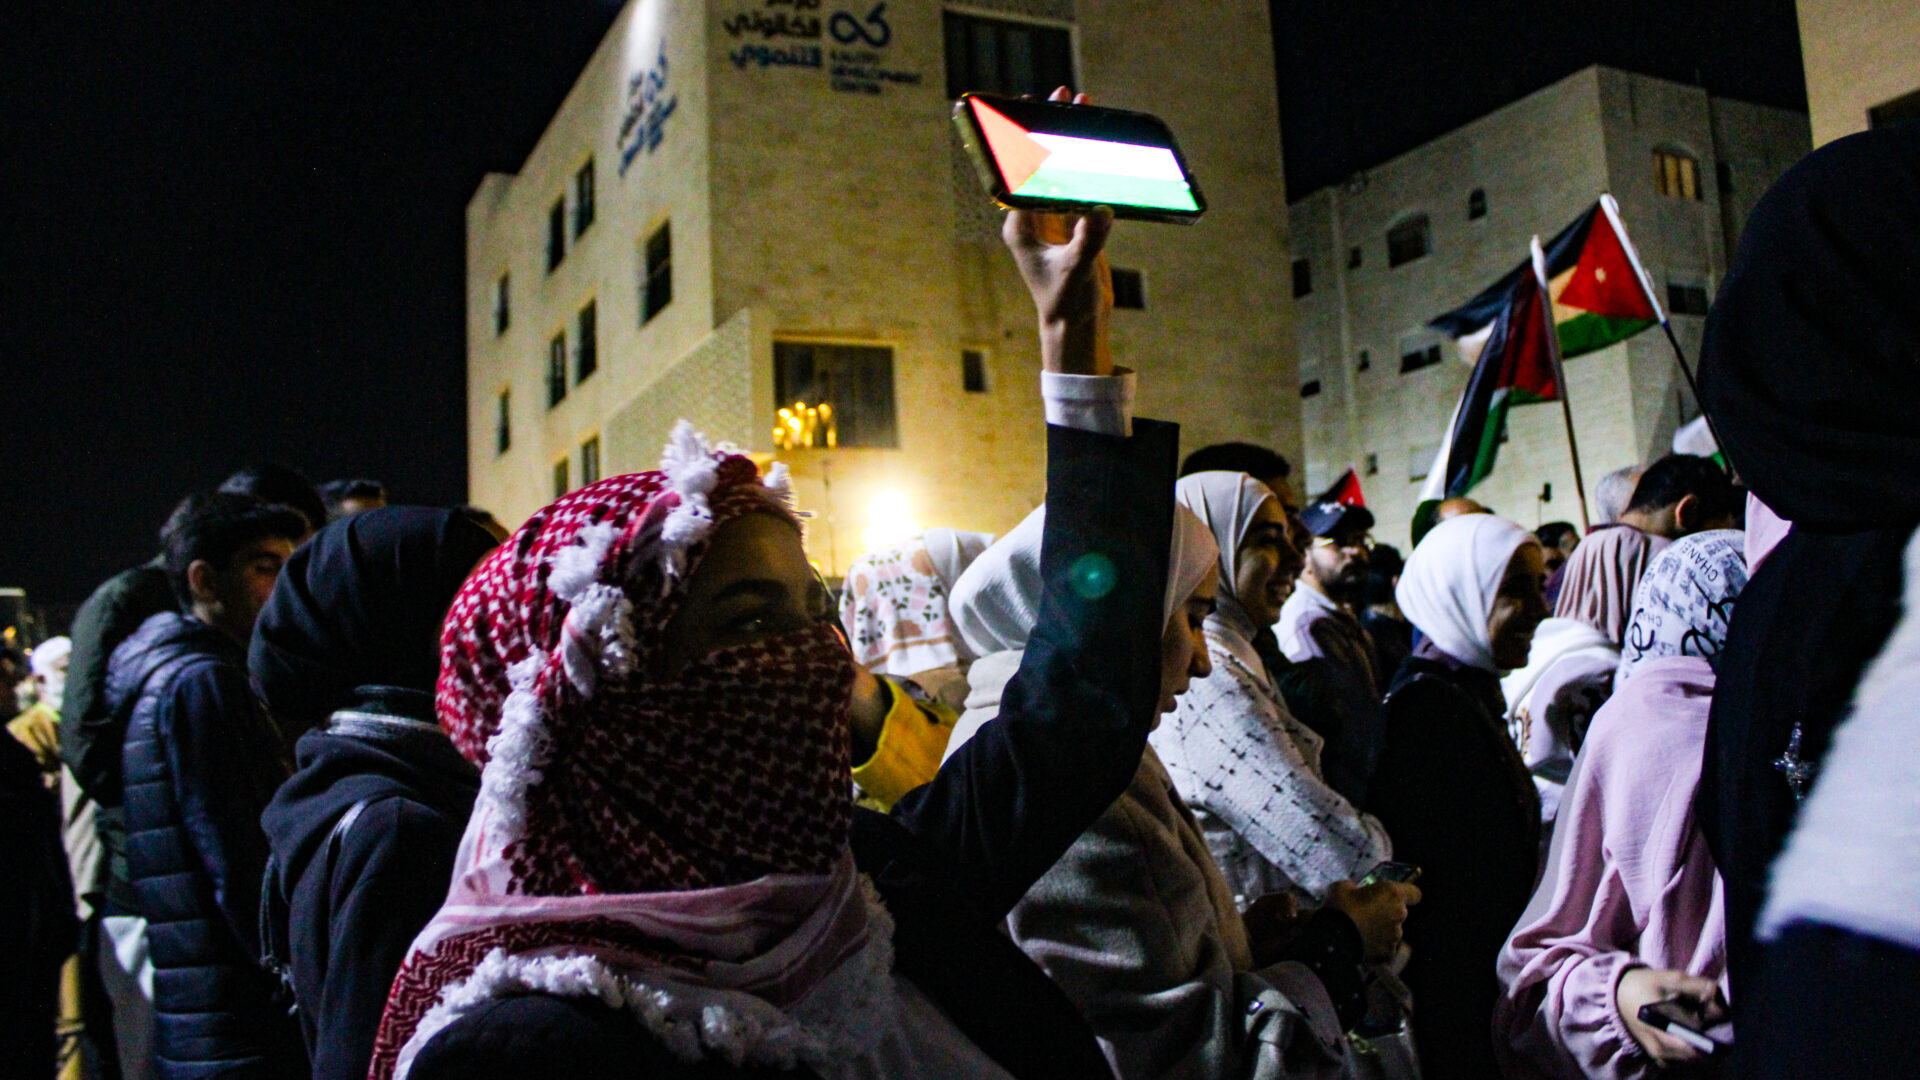 Women hold up their phones showing Palestinian flags at a demonstration outside the Israeli embassy on Saturday April 6, Jordanian flags wave in the background (Hanna Davis)